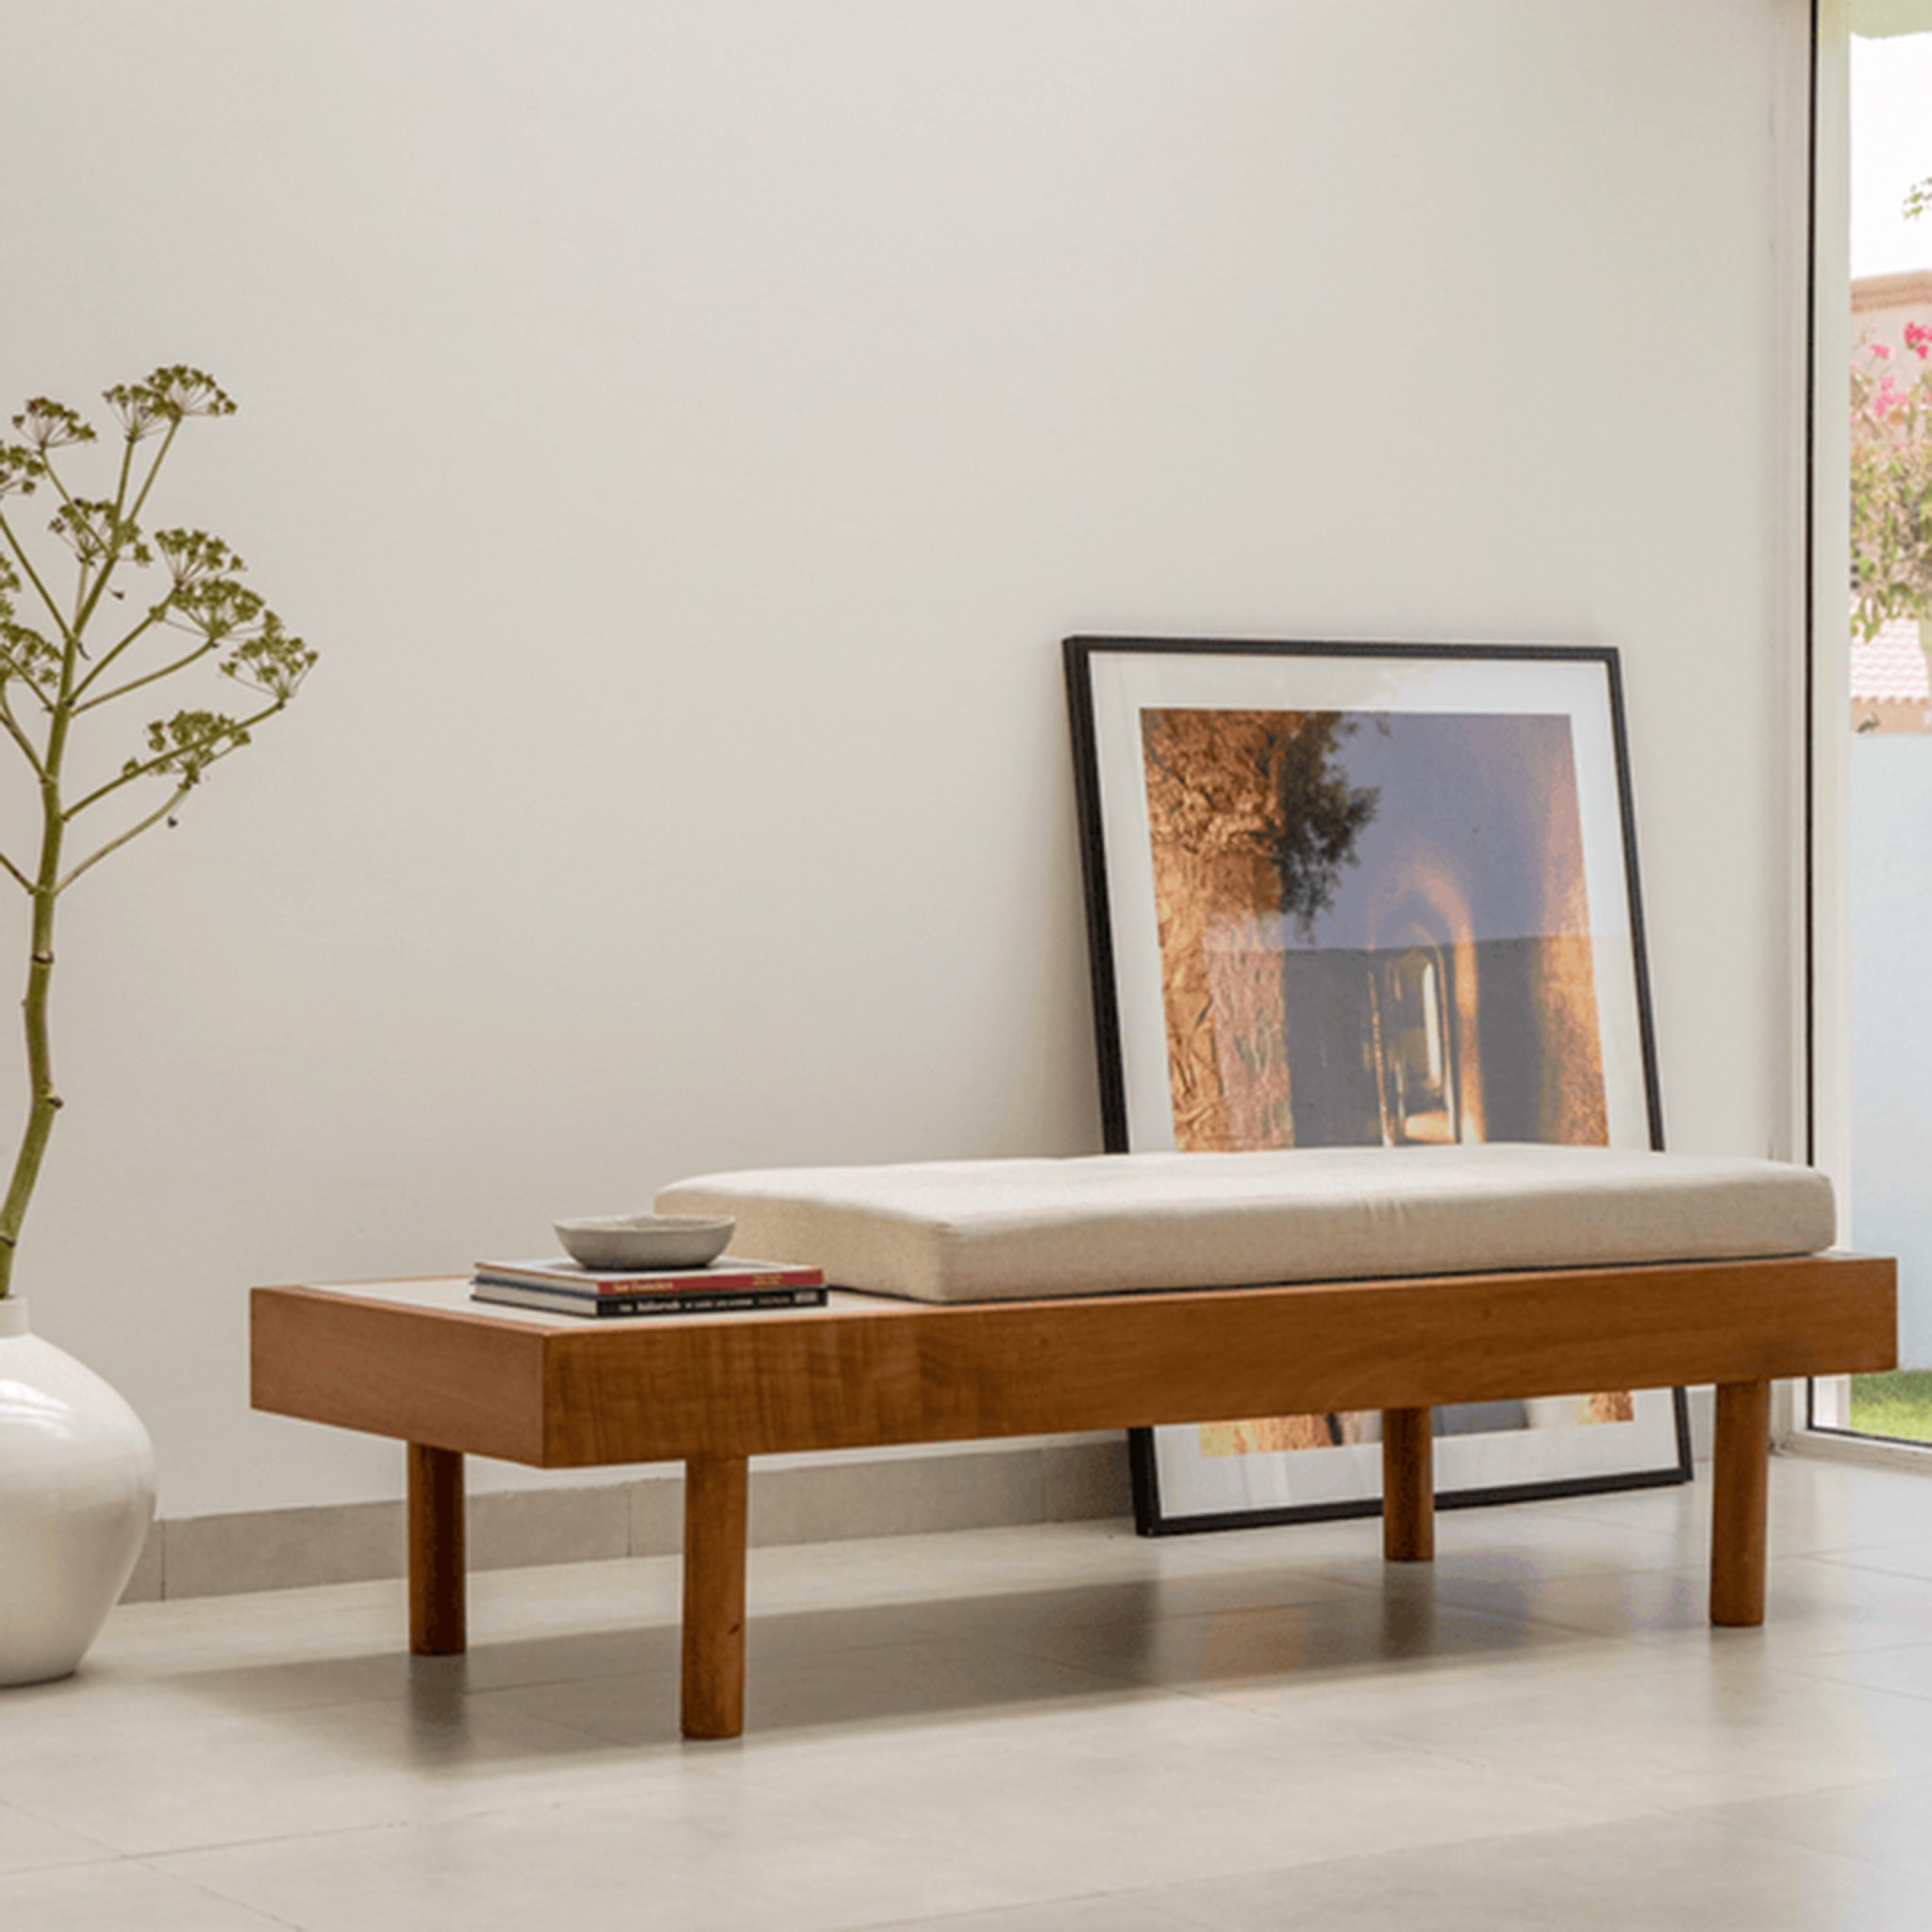 Modern wooden daybed with a customizable cushion and a side tray, placed in a bright minimalist room with a large vase and framed artwork leaning against the wall